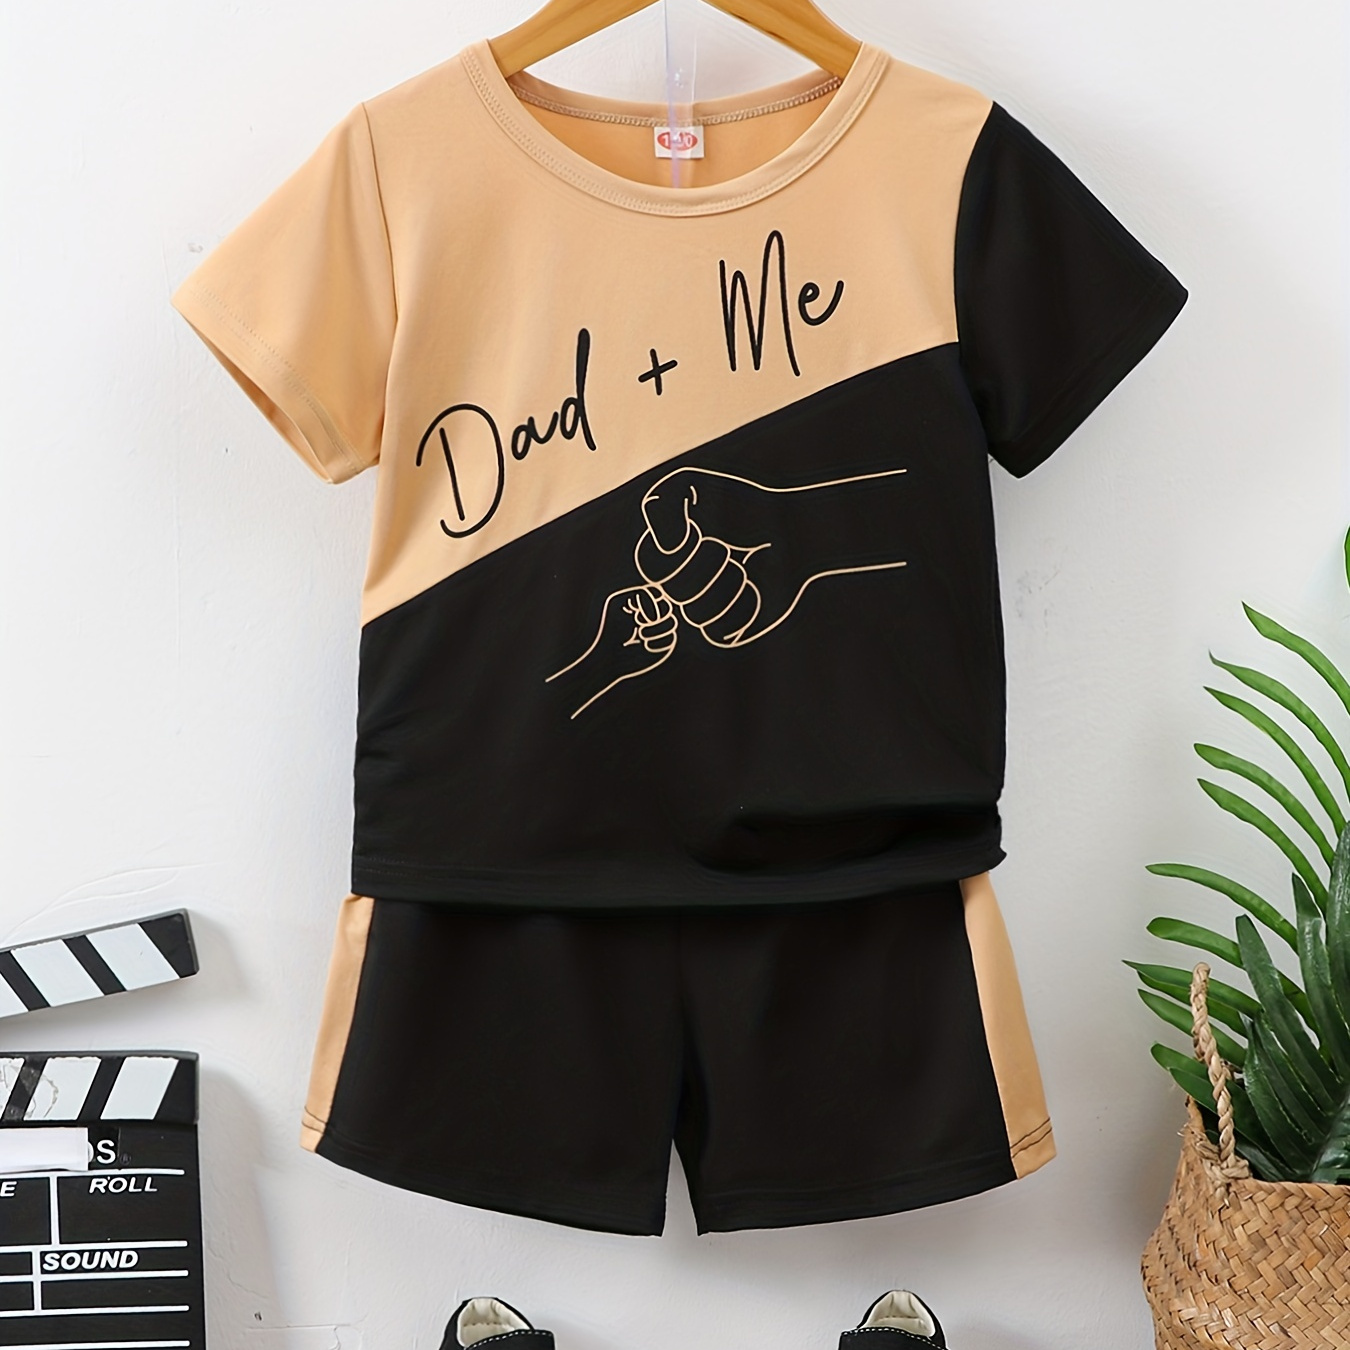 

Boys "daddy + Me" Fists Print Color Block Casual Outfit Round Neck T-shirt & Shorts Kids Summer Clothes Sets